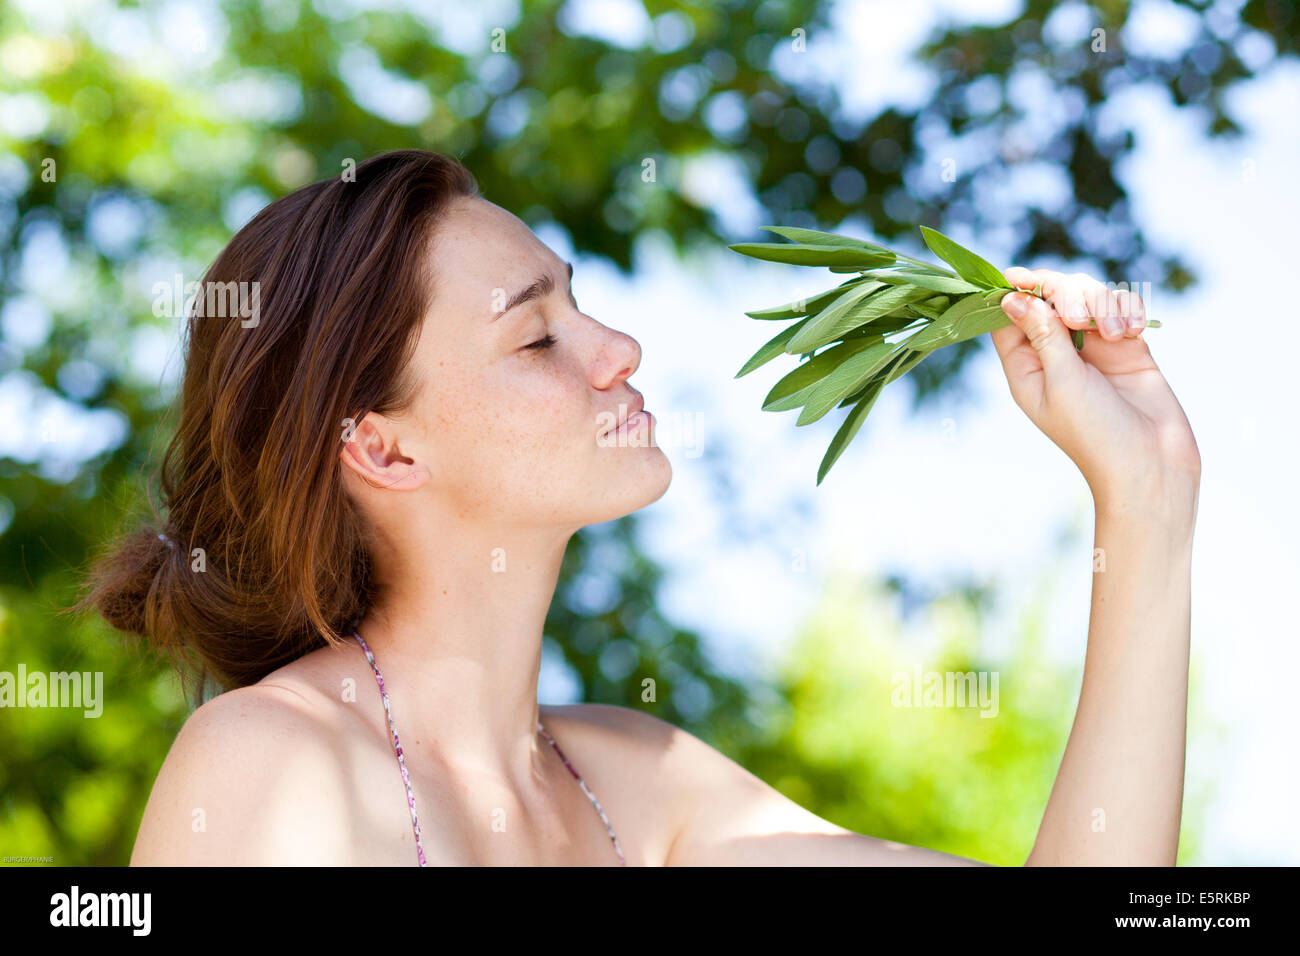 Woman picking sage from the garden. Stock Photo